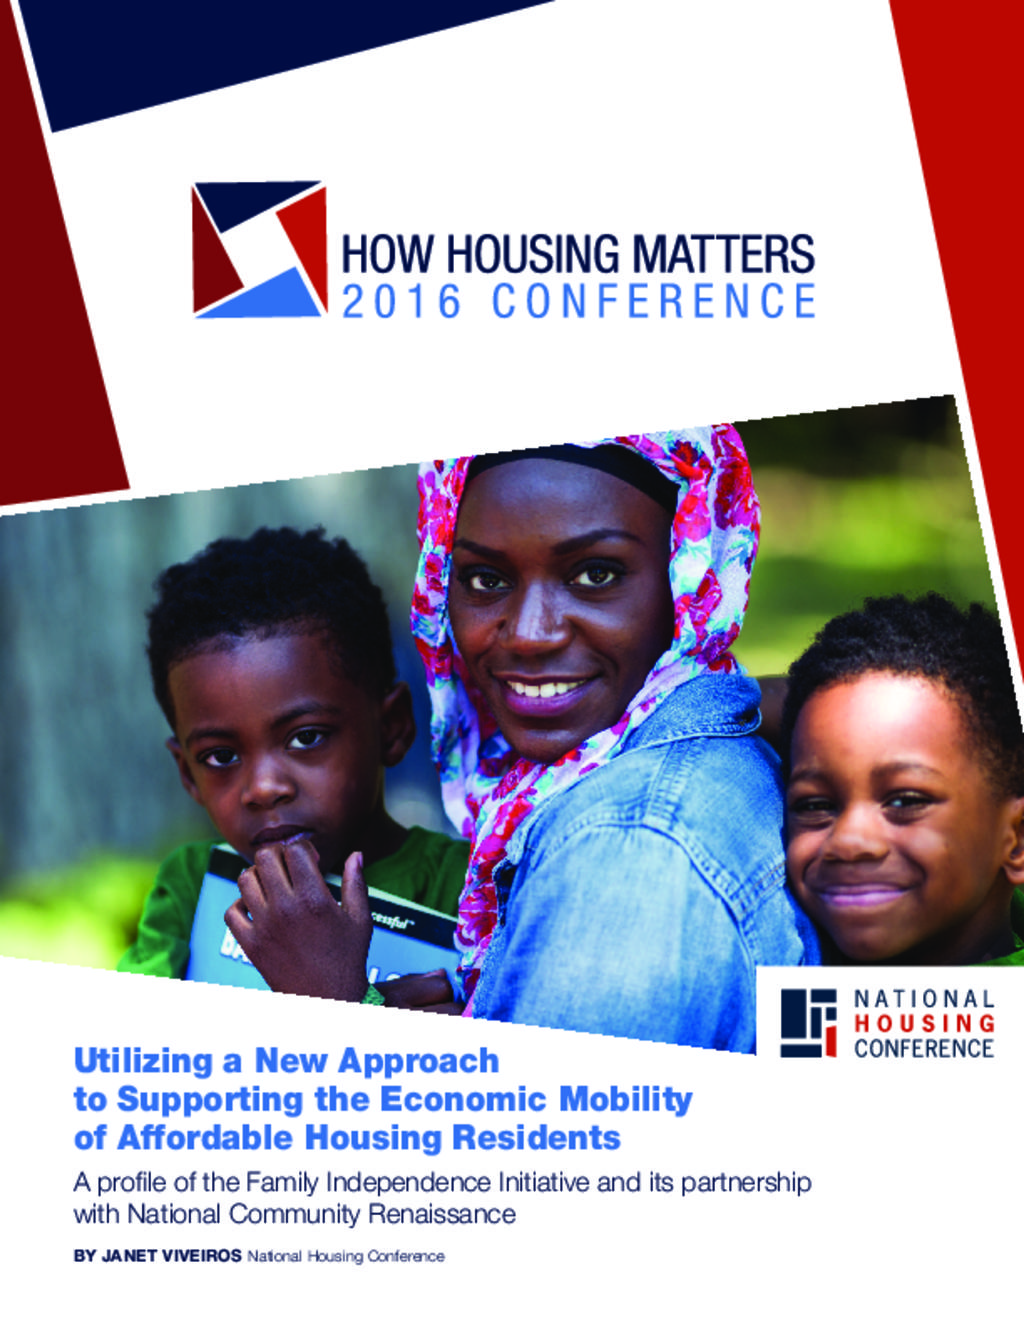 economic mobility for Affordable Housing